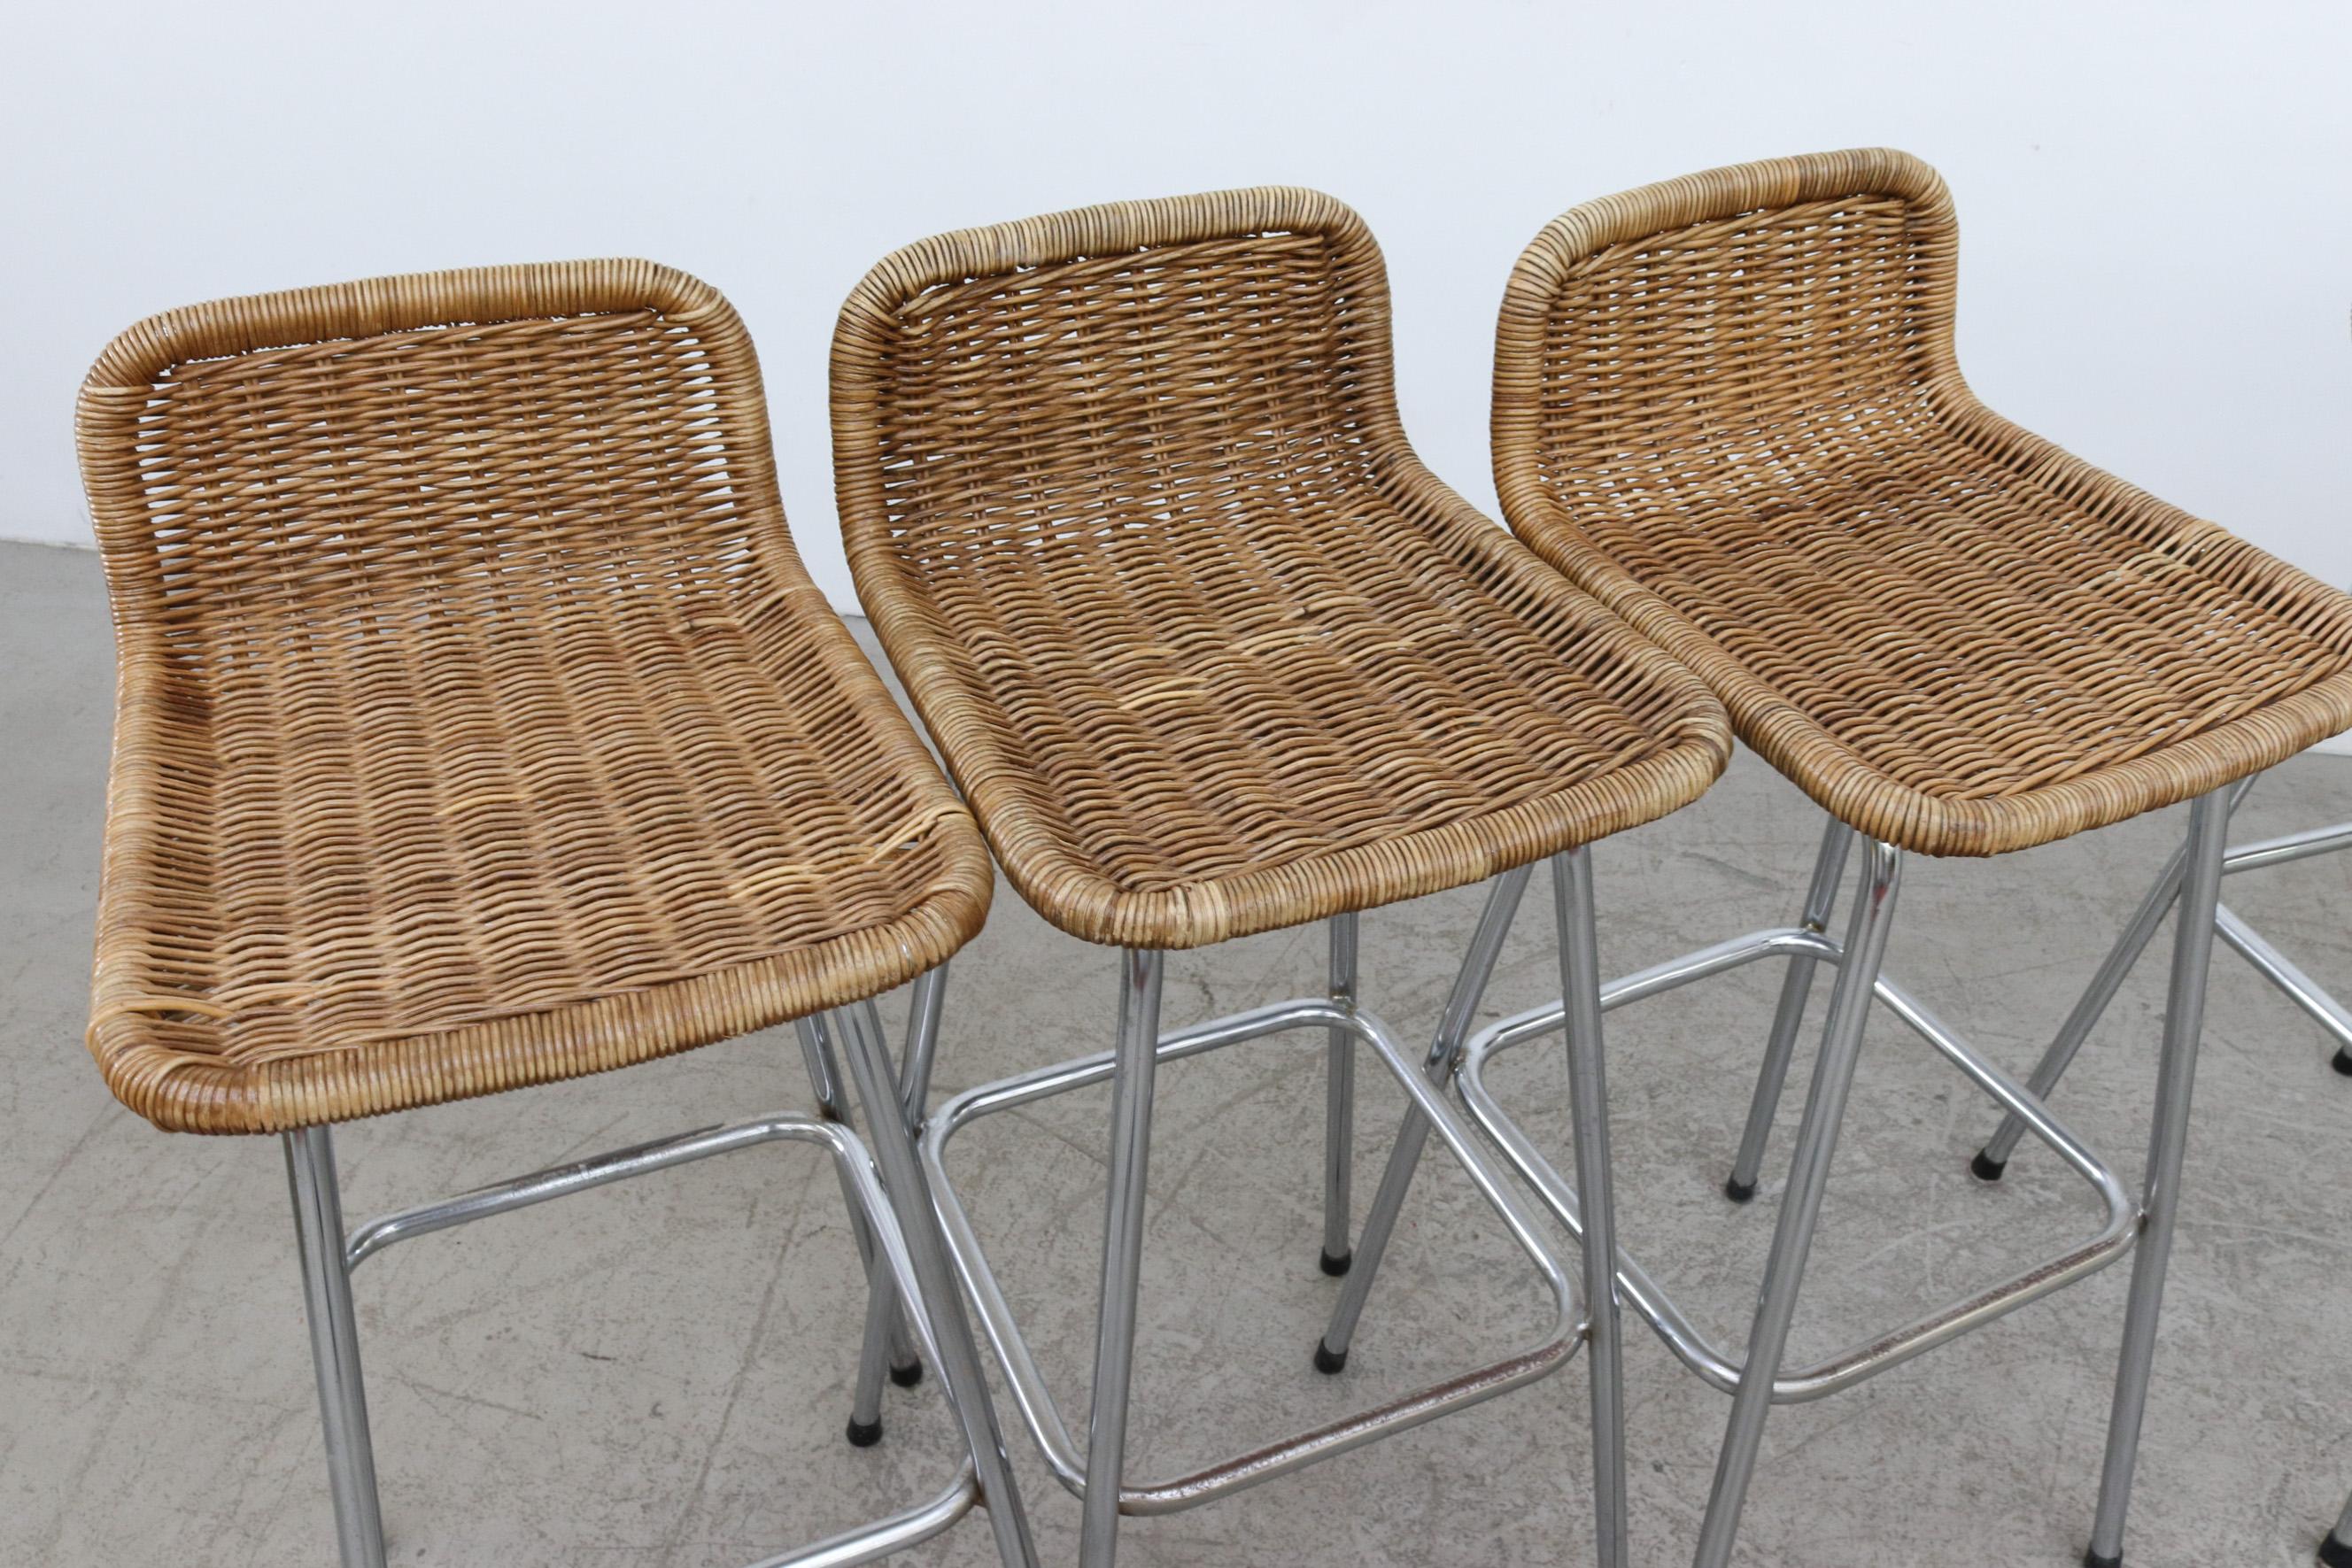 Hand-Woven Charlotte Perriand Style Bar Stools